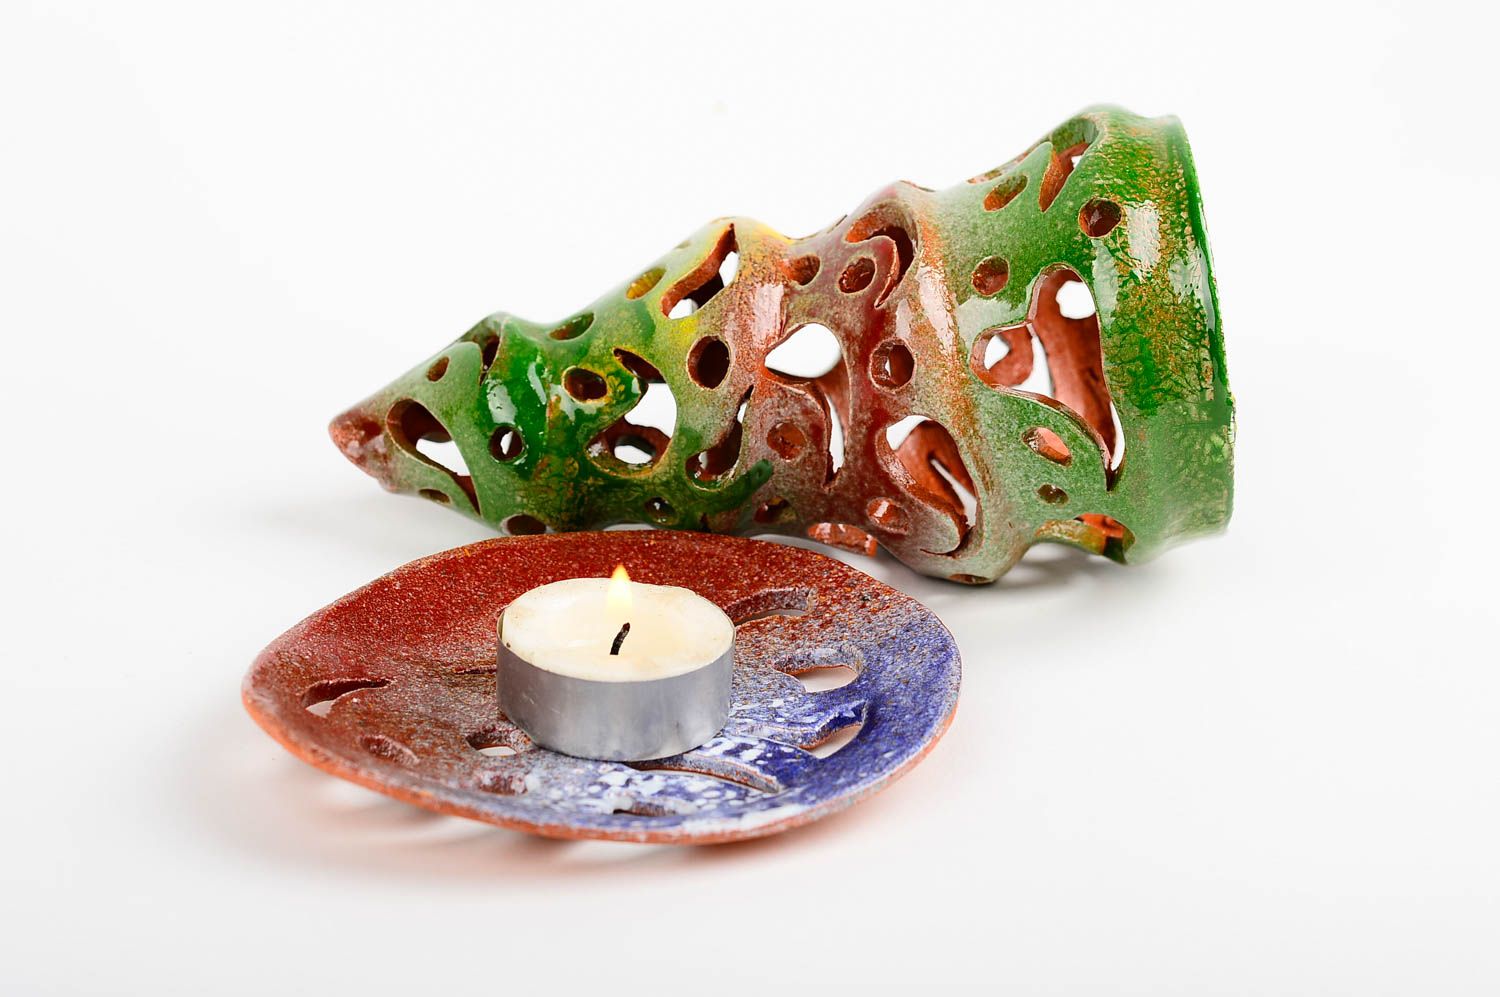 Ceramic candle holder for tea light in the shape of Christmas tree 6,3 inches, 0,44 lb photo 4